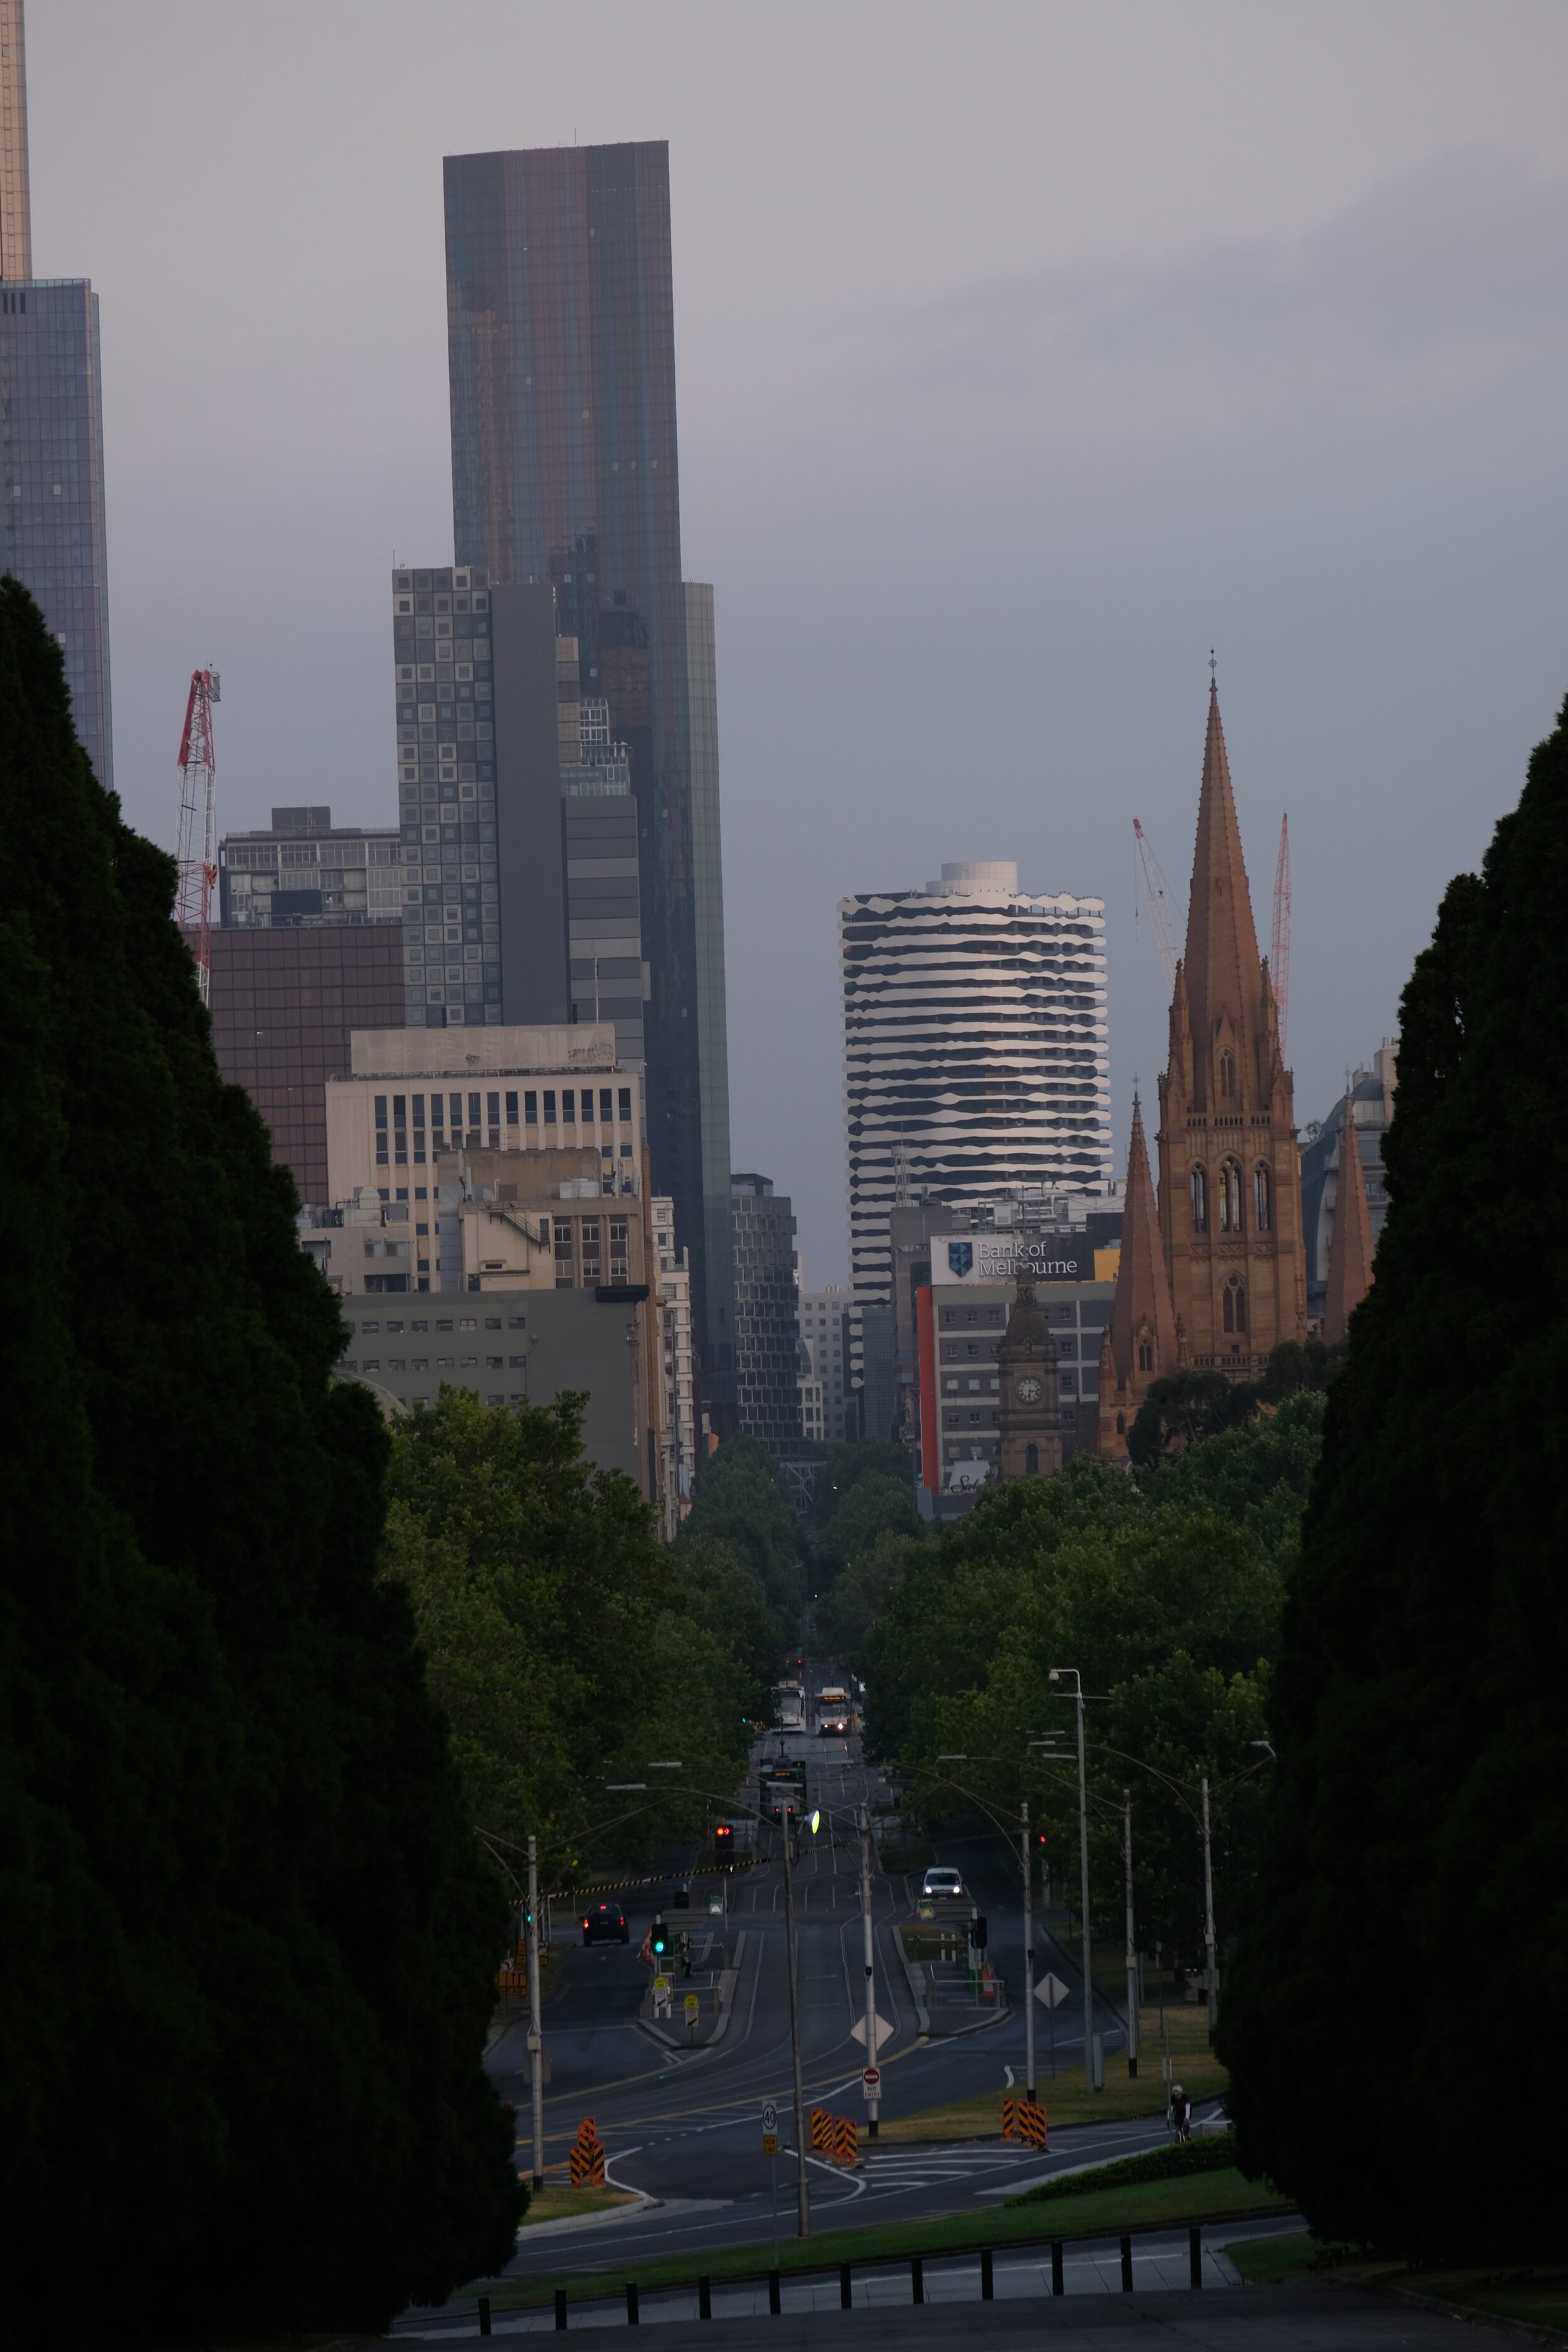 Looking up Swanston St to Swanston Sq building, Melbourne